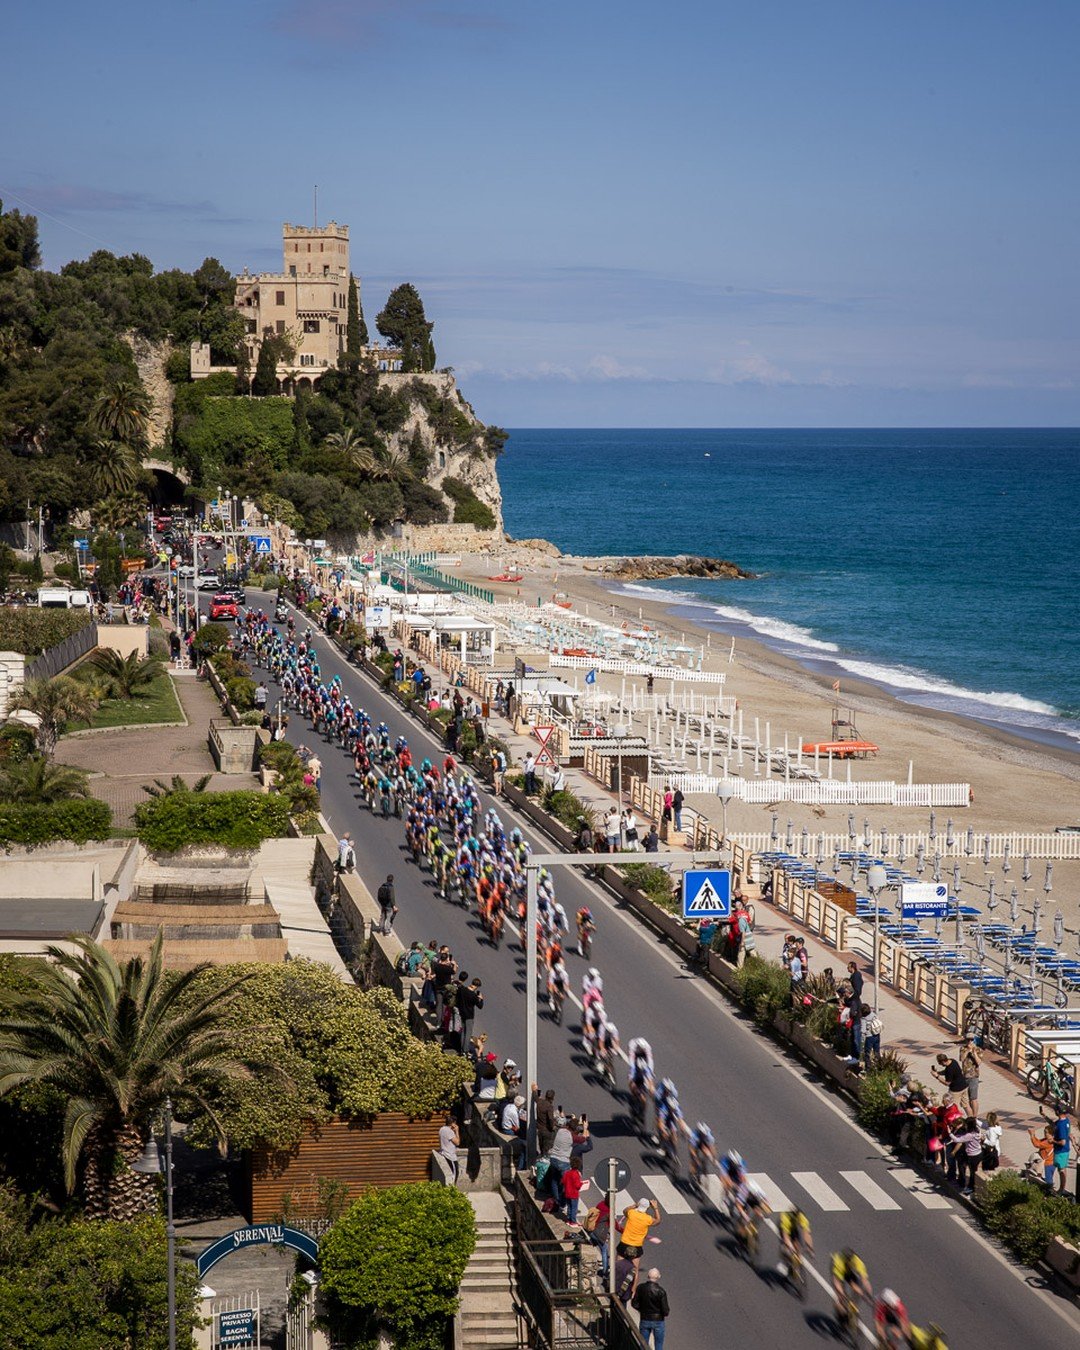 While chilling on a balcony this afternoon I somehow ended up watching Stage 4 of Giro d'Italia. 🚴🤷&zwj;♀️

#finaleligure #roadbikes #giroditalia #roadcycling #liguria #roadrace #race #italy #justajeskova